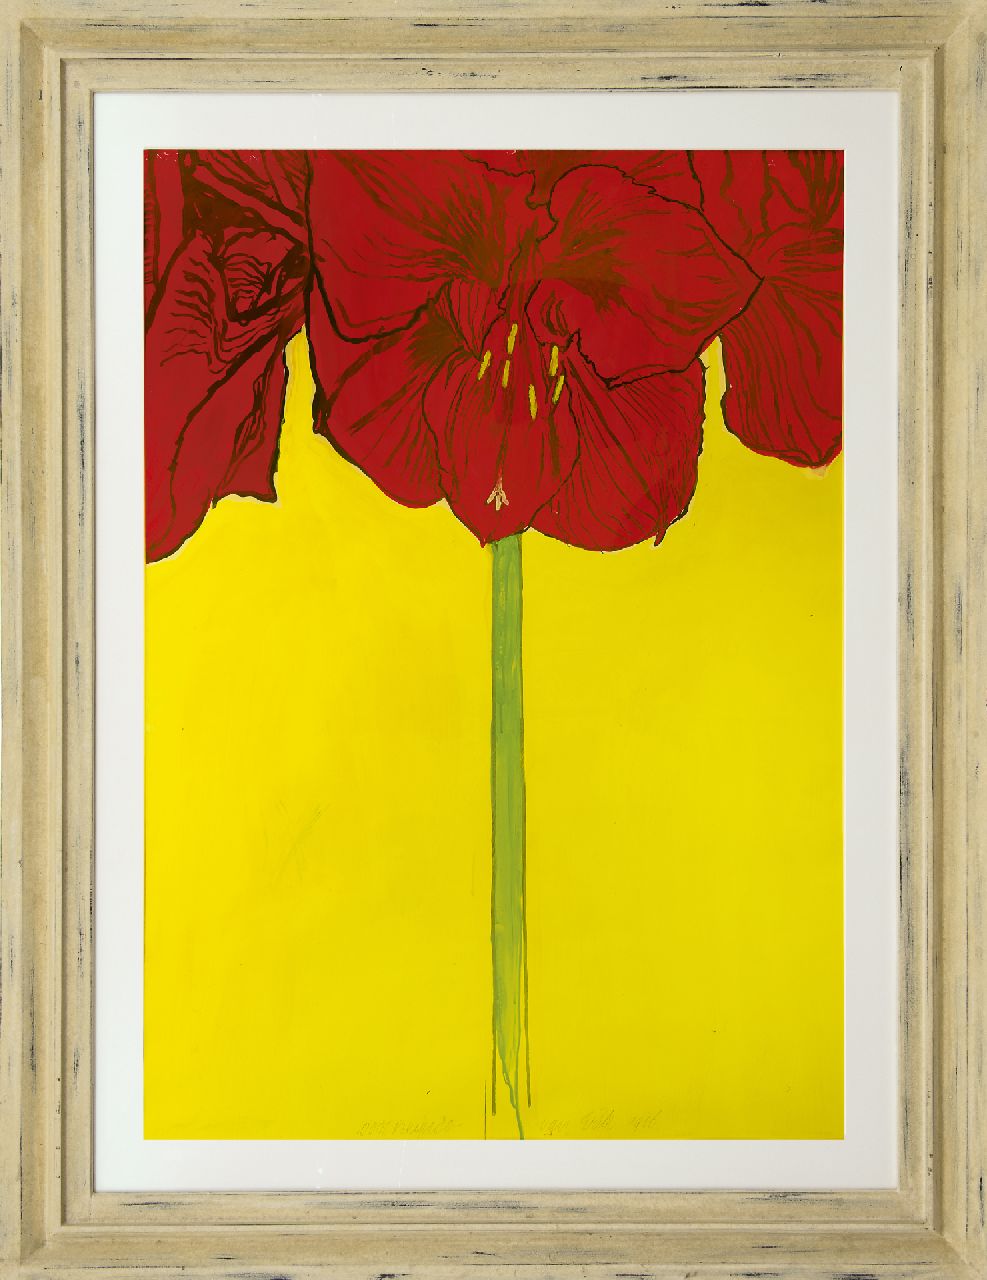 Andriesse E.B.  | Erik Bart Andriesse, Amaryllis, gouache on paper 115.0 x 81.0 cm, signed l.c. and dated 1986